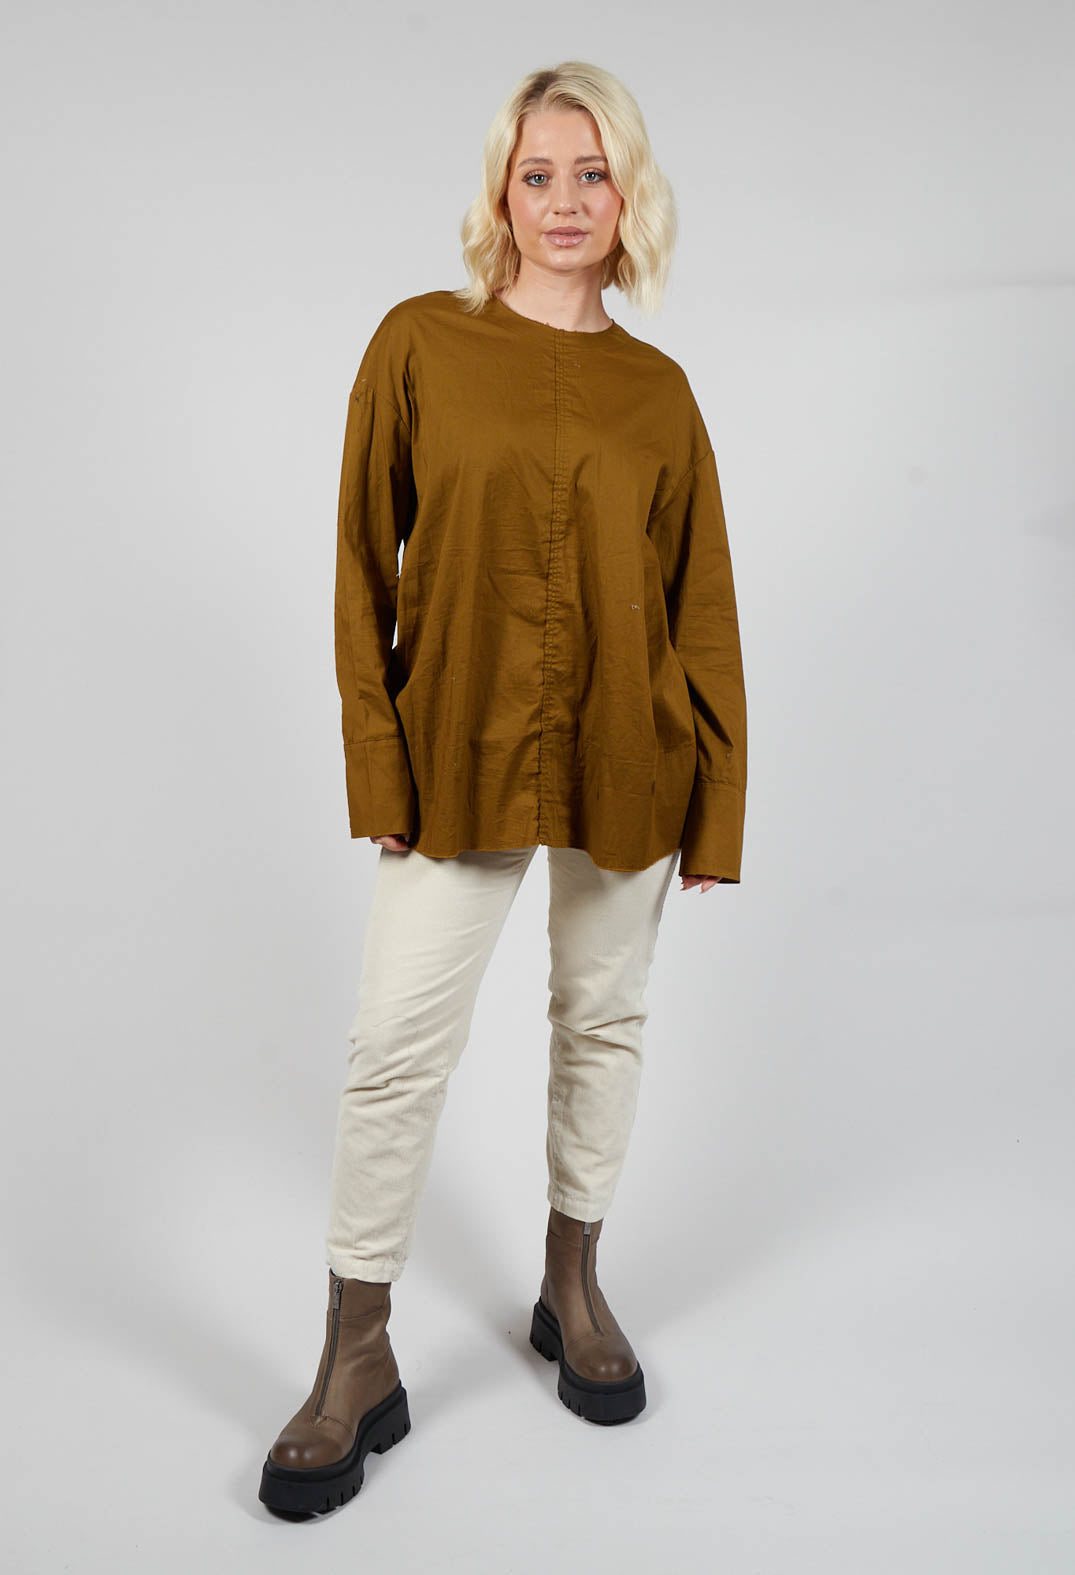 Gathered Back Top in Oliva